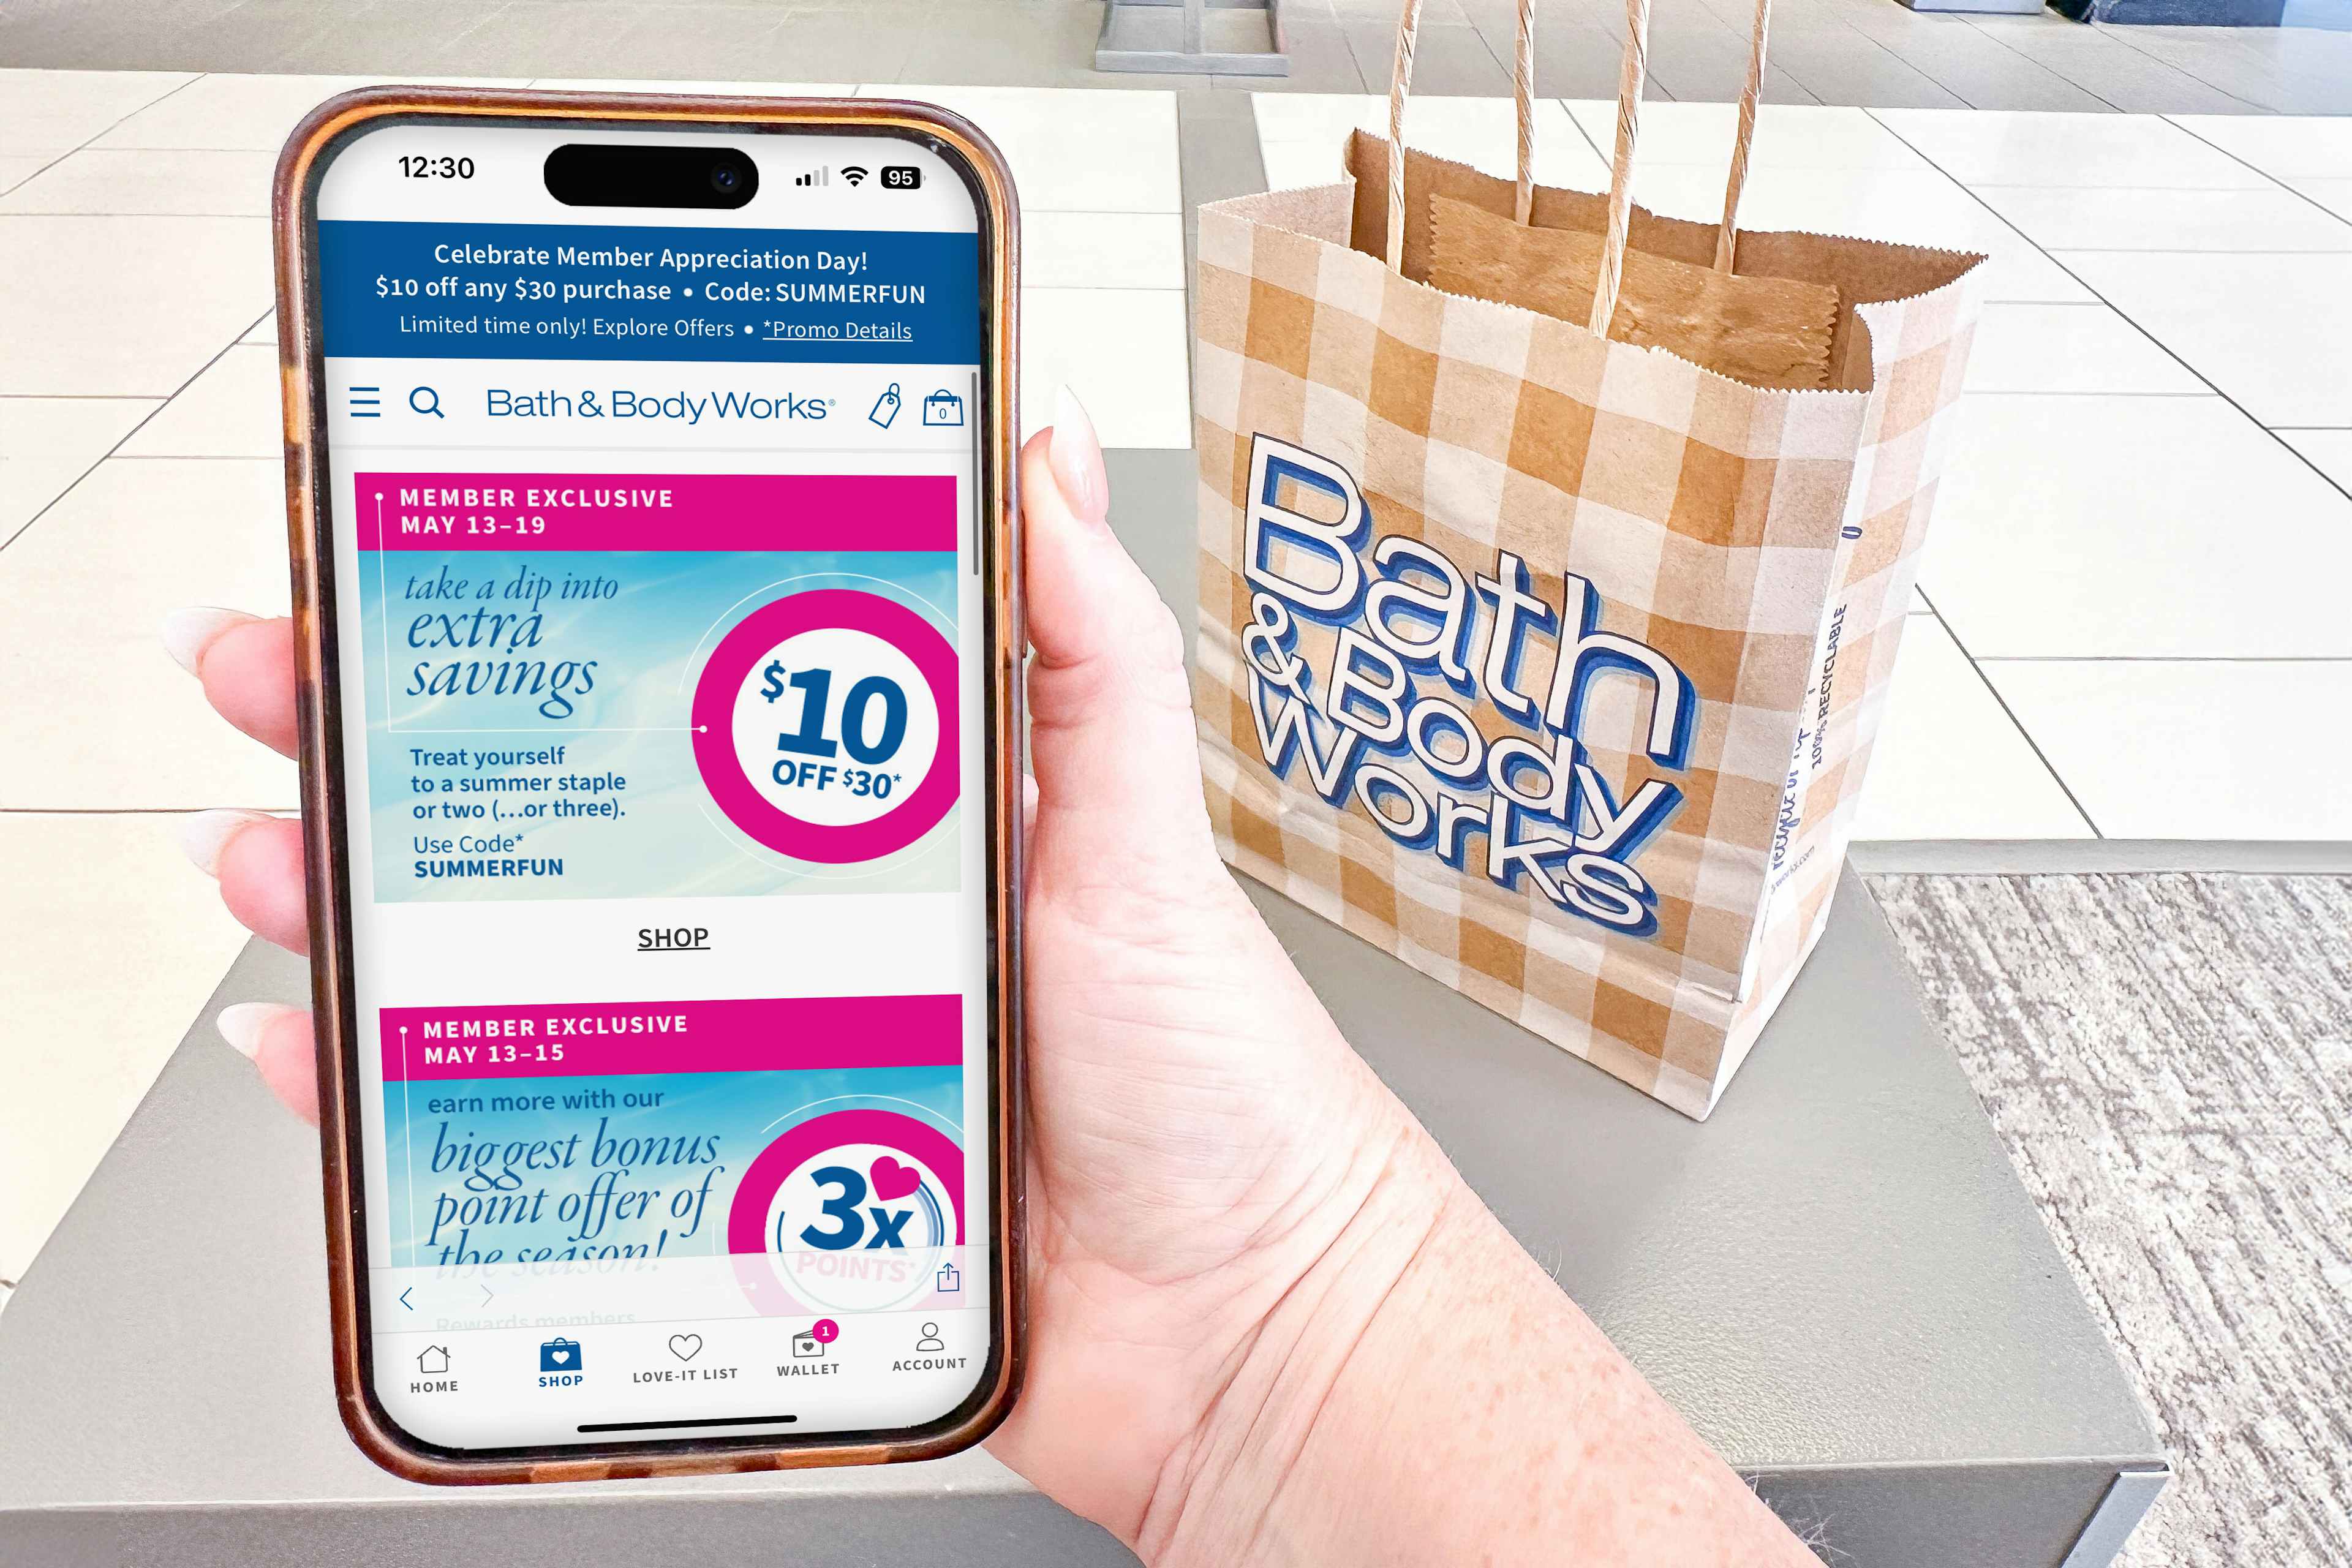 bath-and-body-works-members-appreciation-10-off-30-coupon-phone-app-bag-kcl-3x2